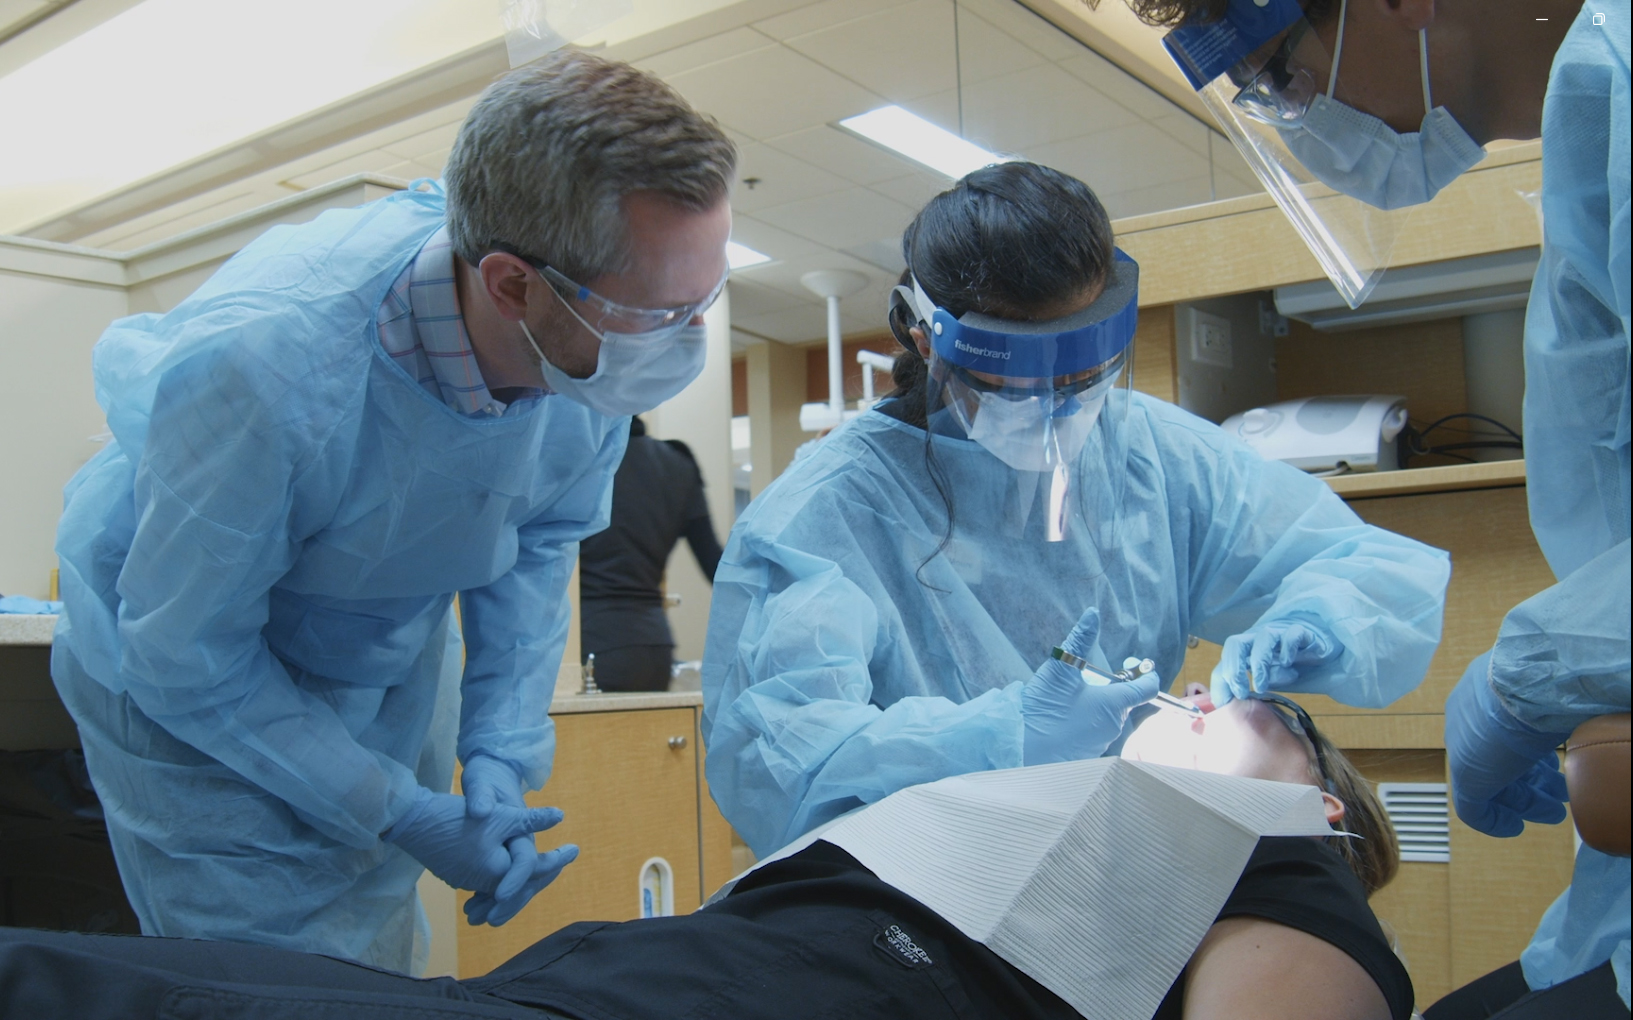 Wil Abshier, left, assistant professor of comprehensive dentistry at the University of Louisville School of Dentistry, is a recent graduate of UofL’s new Master of Science in Health Professions Education program.